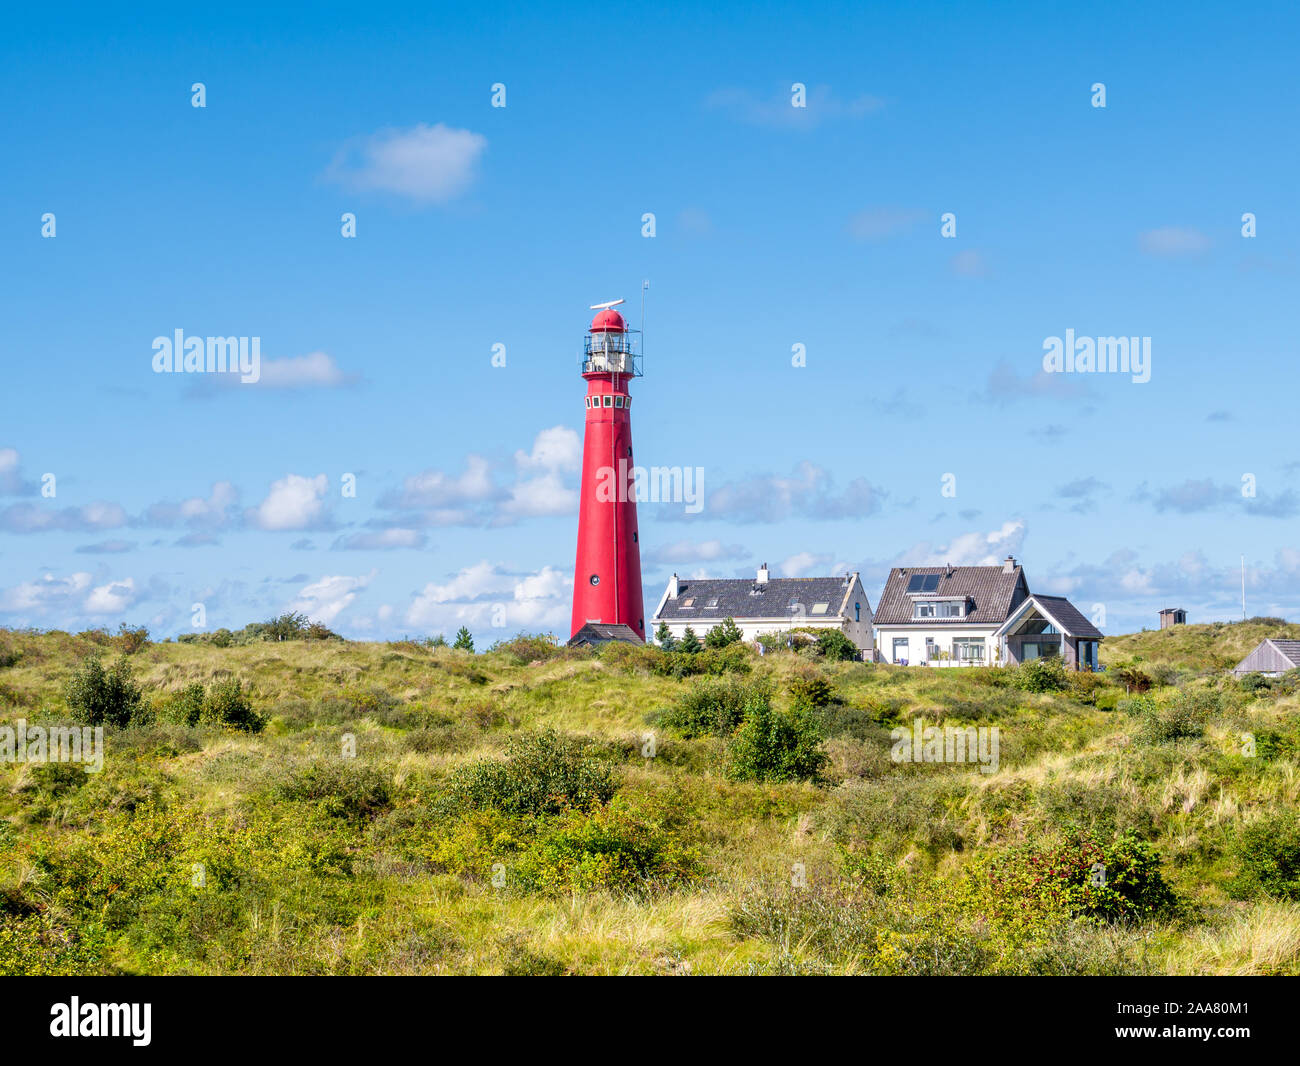 Lighthouse North Tower and houses in Westerduinen dunes on Frisian island Schiermonnikoog, Netherlands Stock Photo